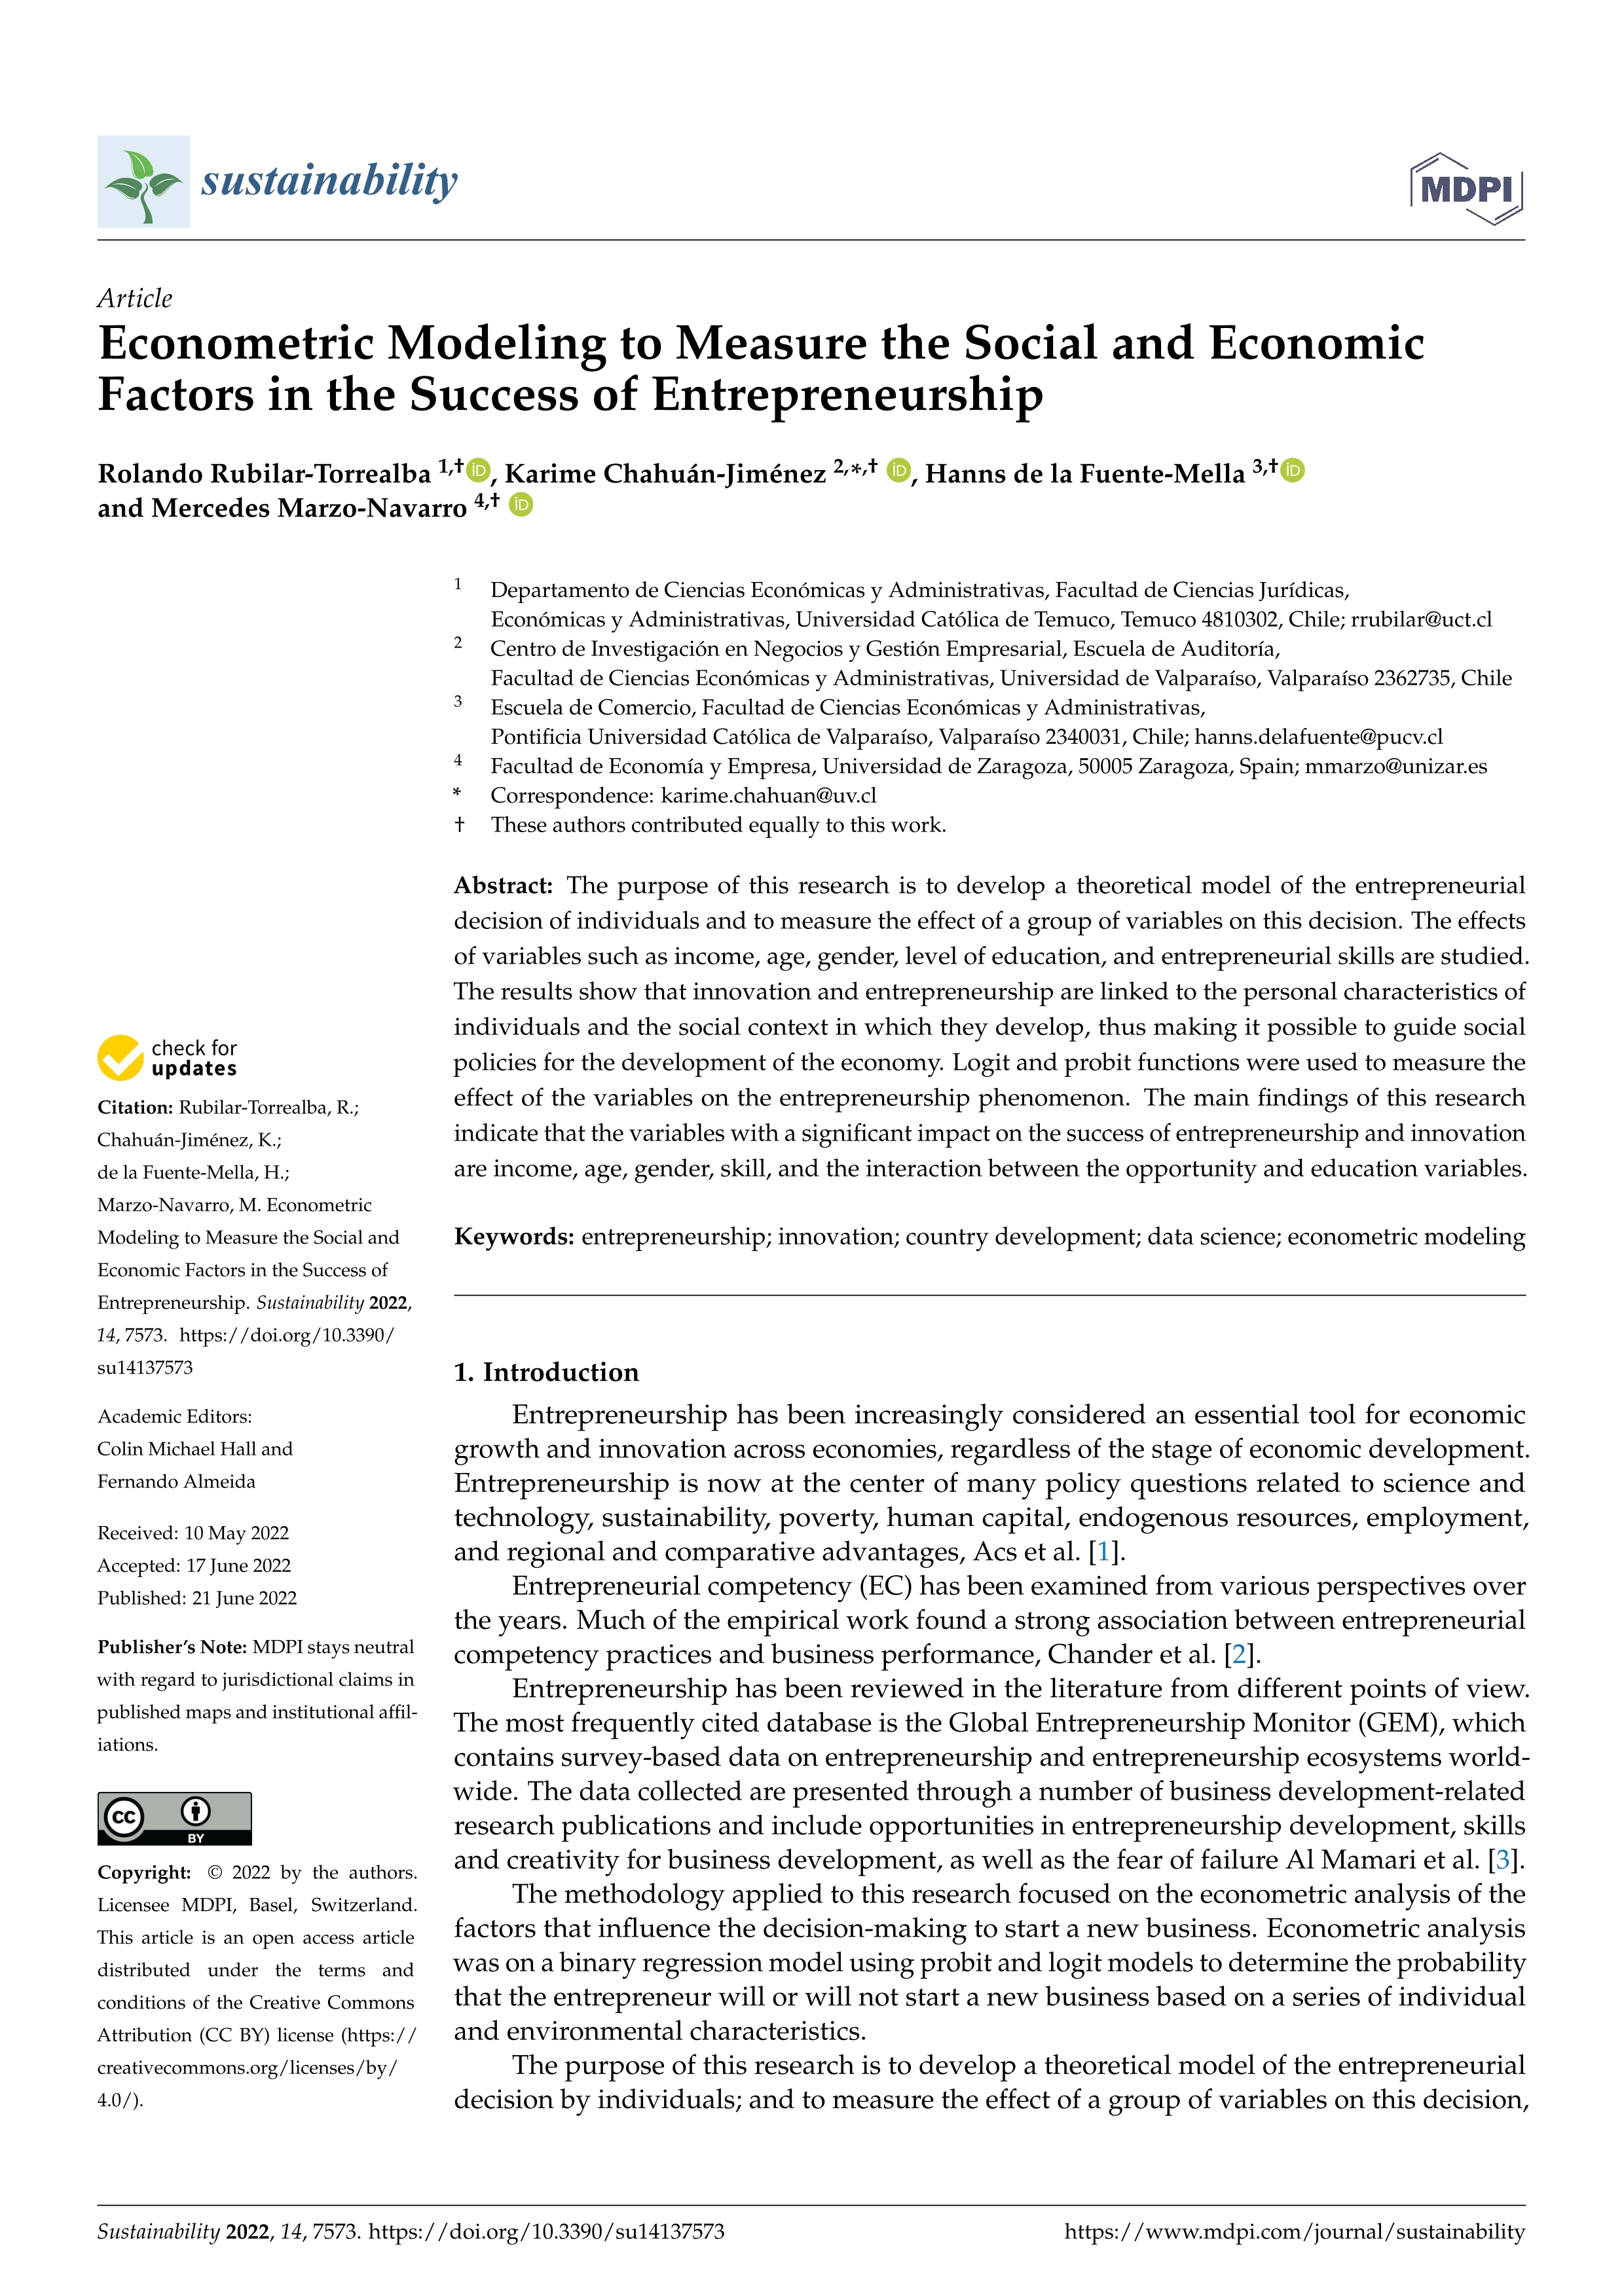 Econometric Modeling to Measure the Social and Economic Factors in the Success of Entrepreneurship